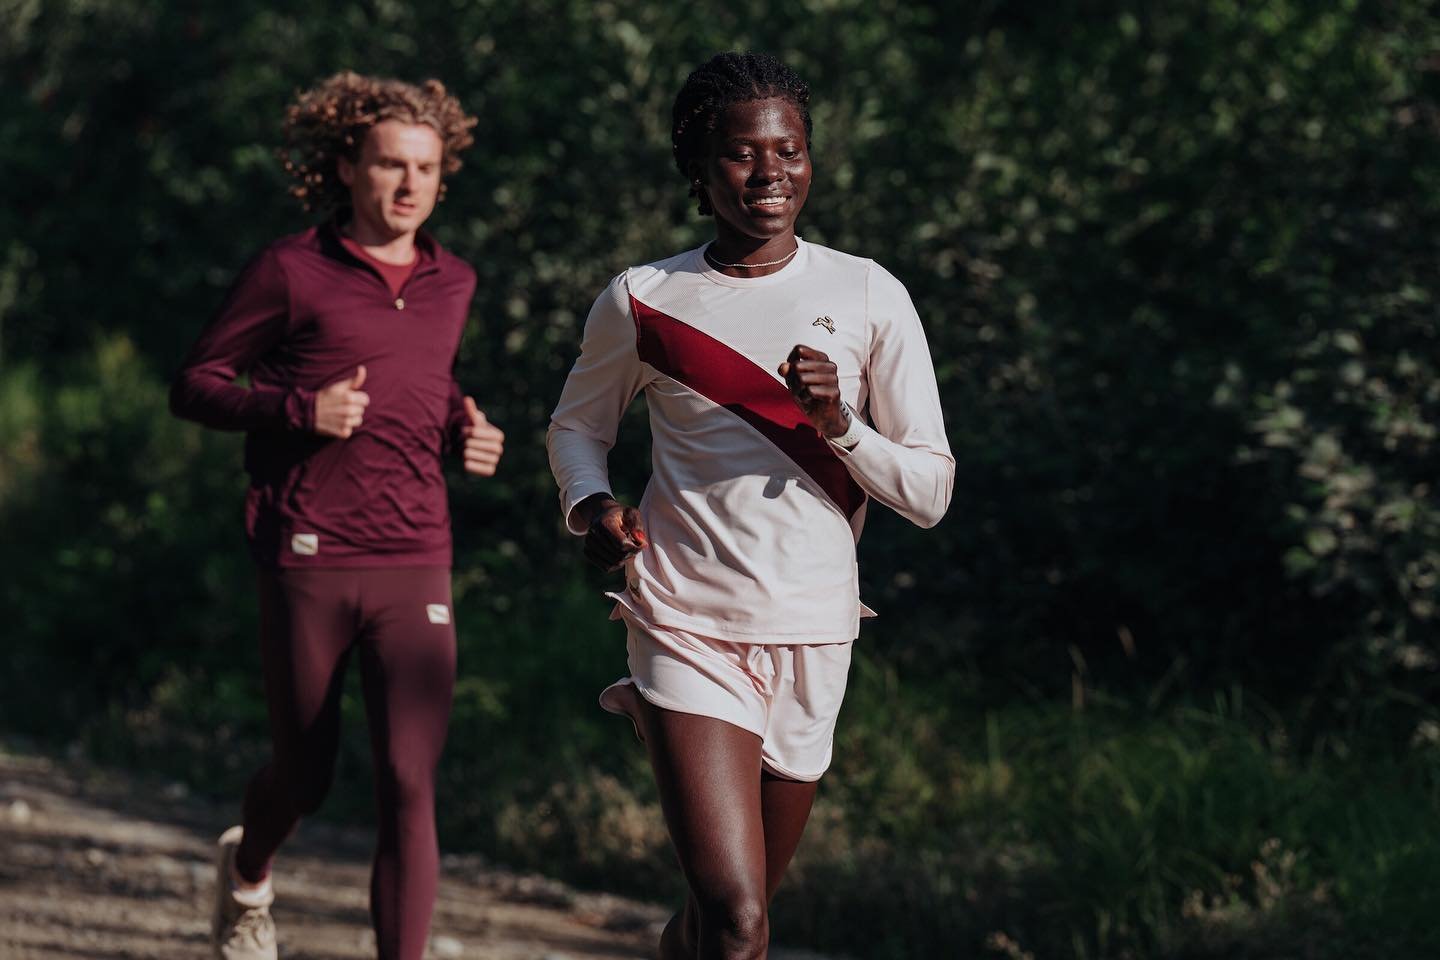 When you don't have the resources, you have to be distinct': Tracksmith  founder Matt Taylor — The Challenger Project